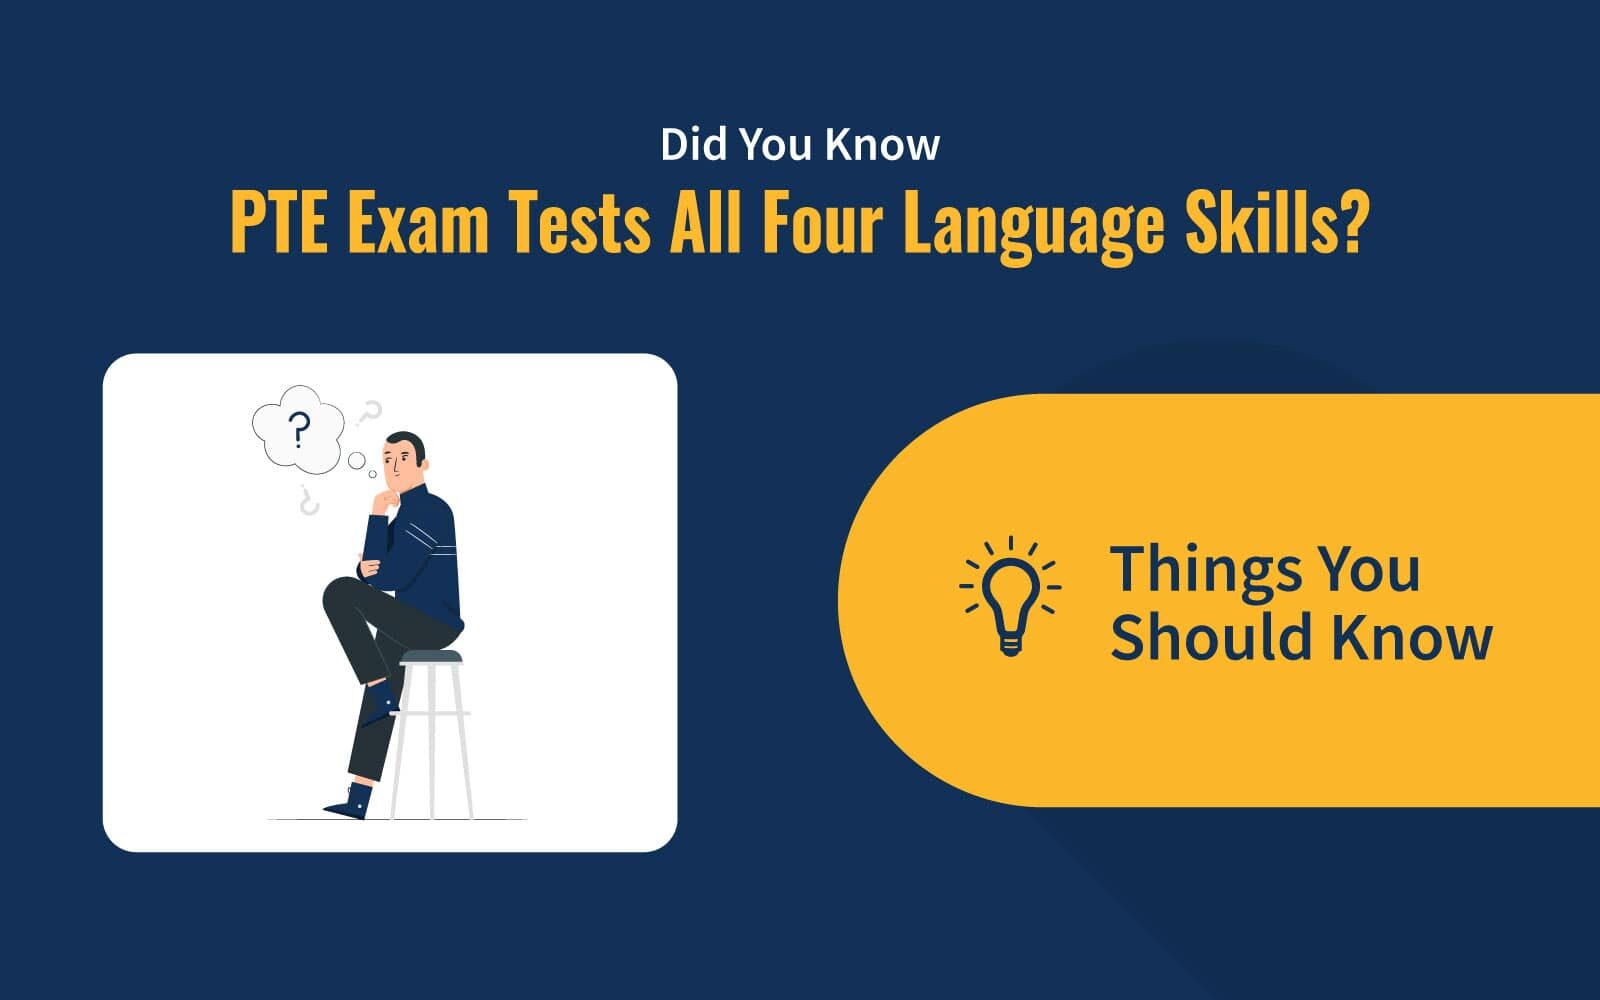 Did You Know PTE Exam Tests All Four Language Skills?